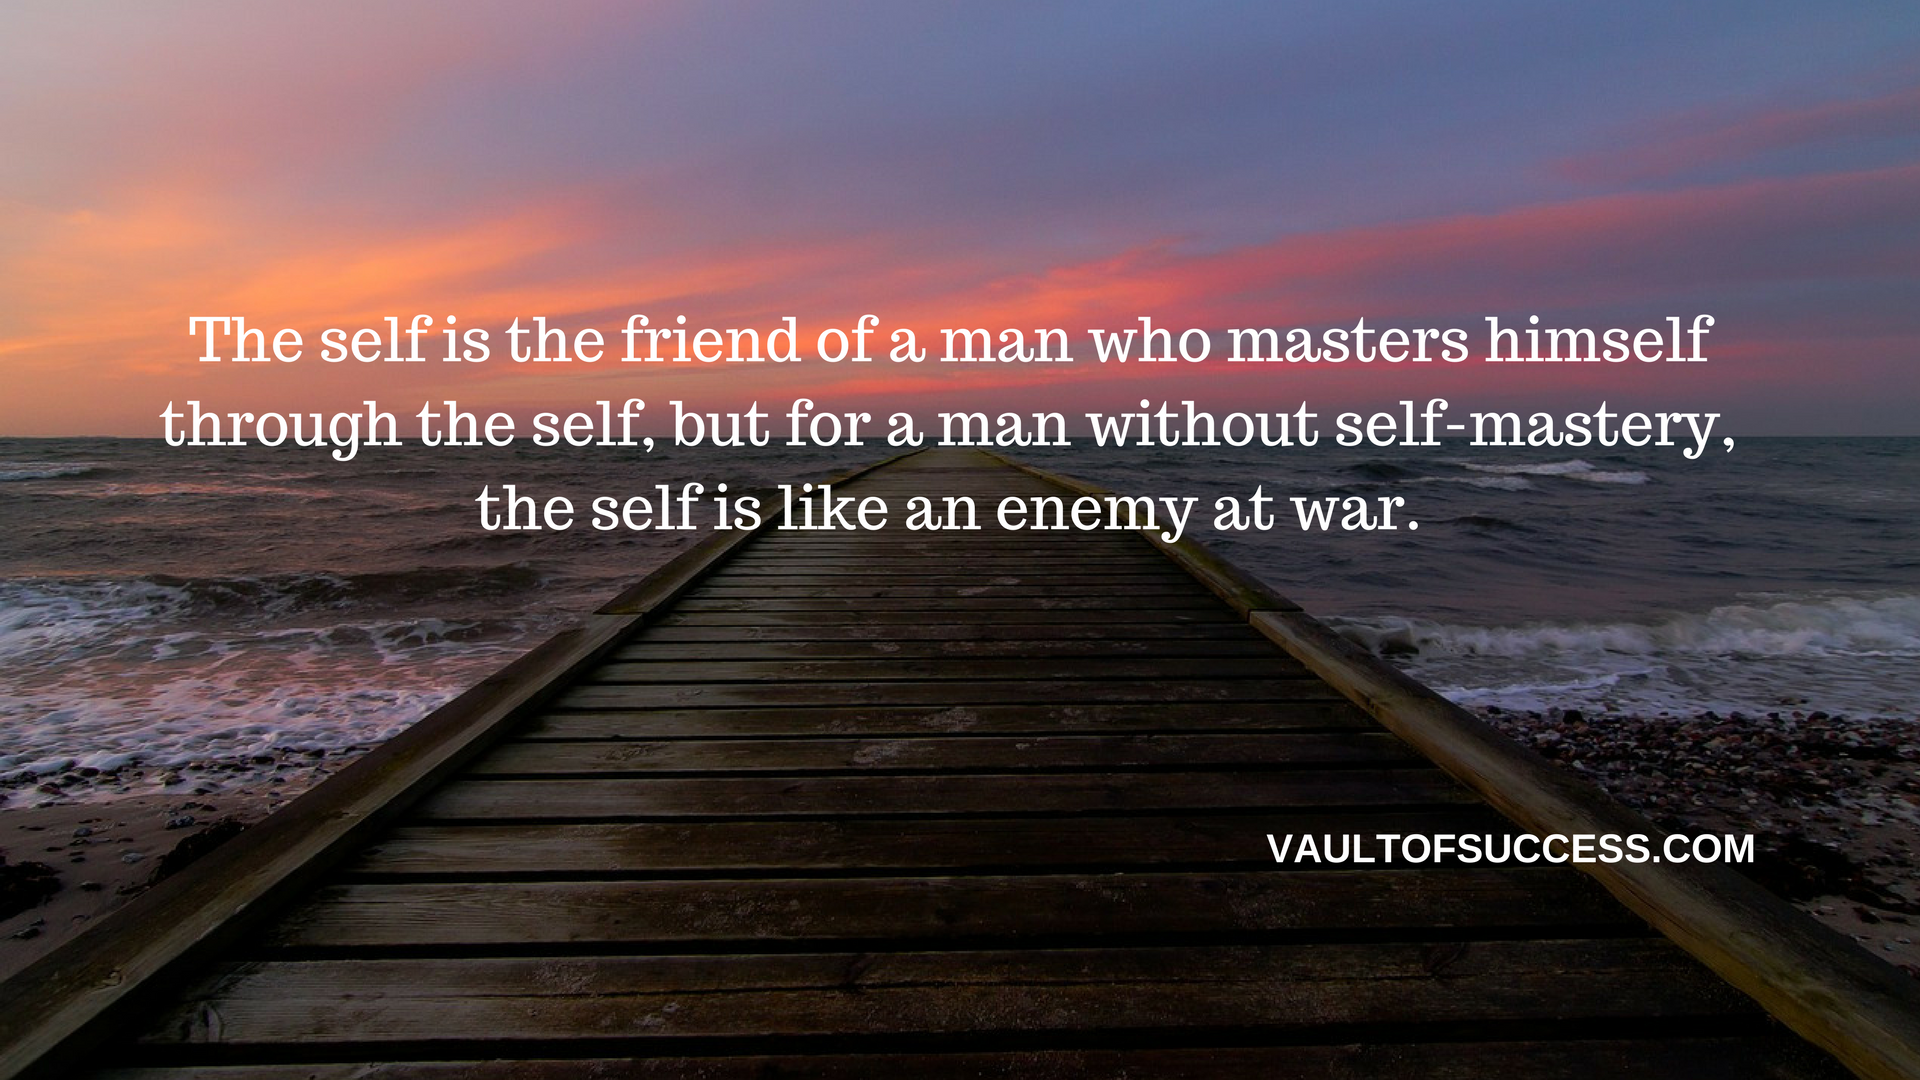 The self is the friend of a man who masters himself through the self, but for a man without self-mastery, the self is like an enemy at war.png